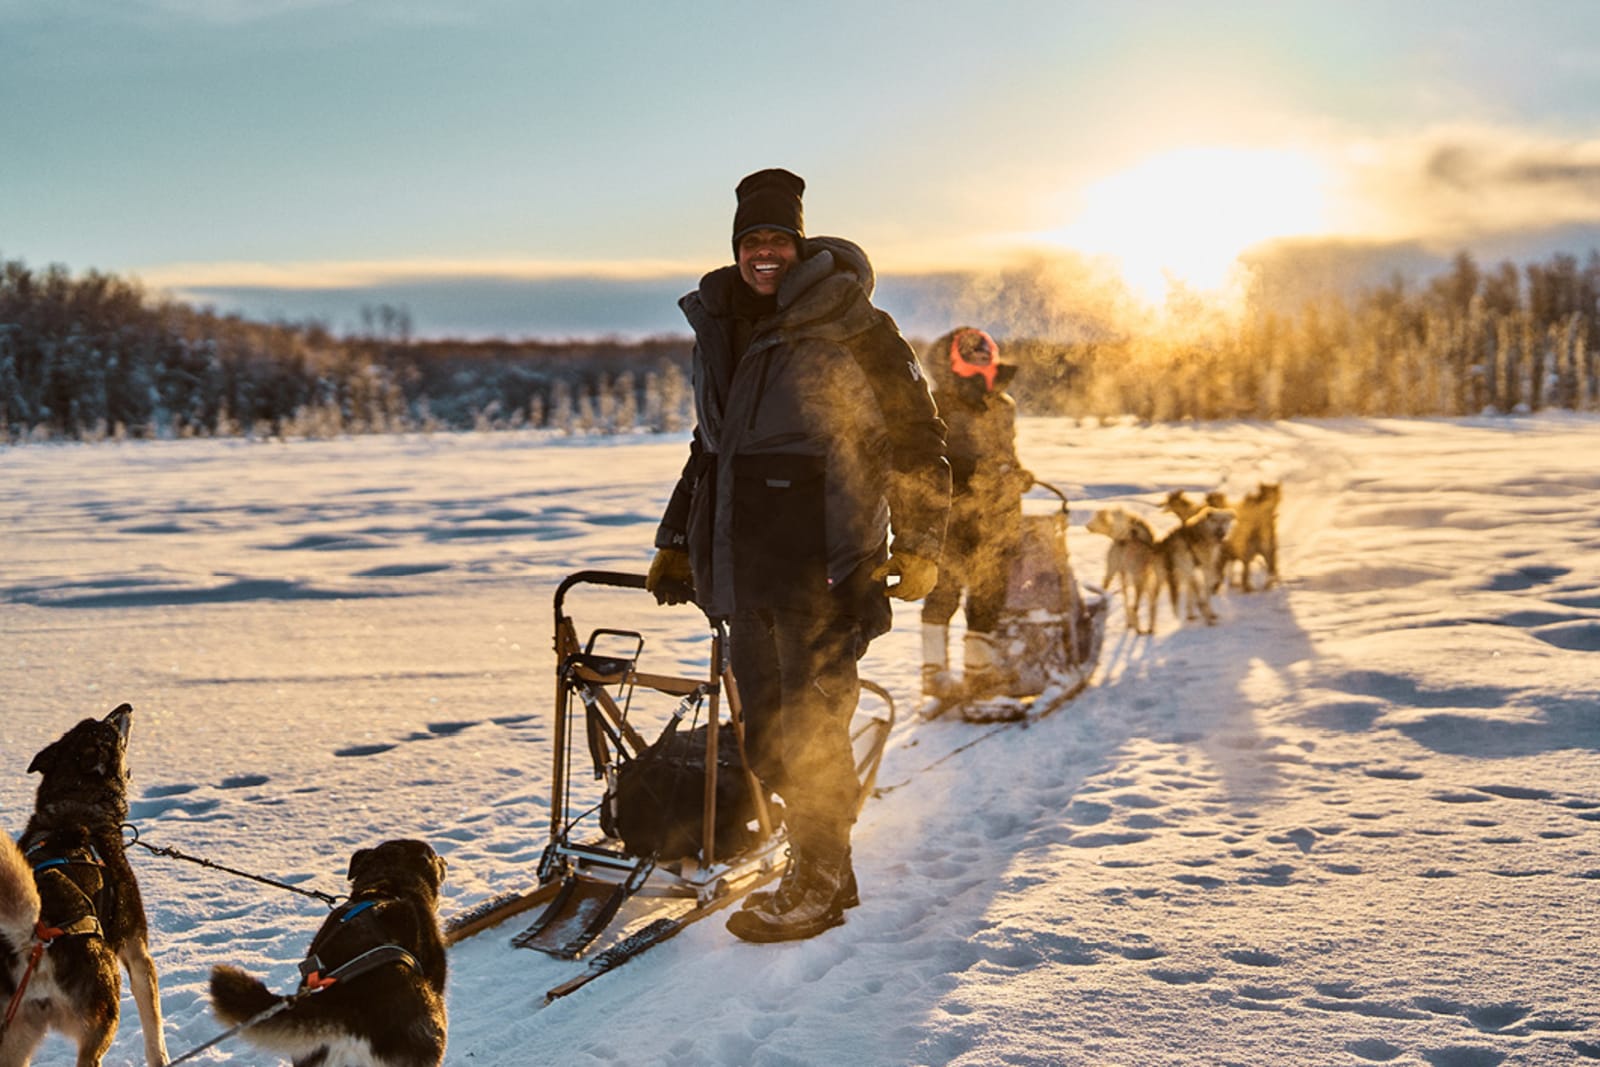 There are several Alaska cruise excursions that allow you to learn about sled dog racing